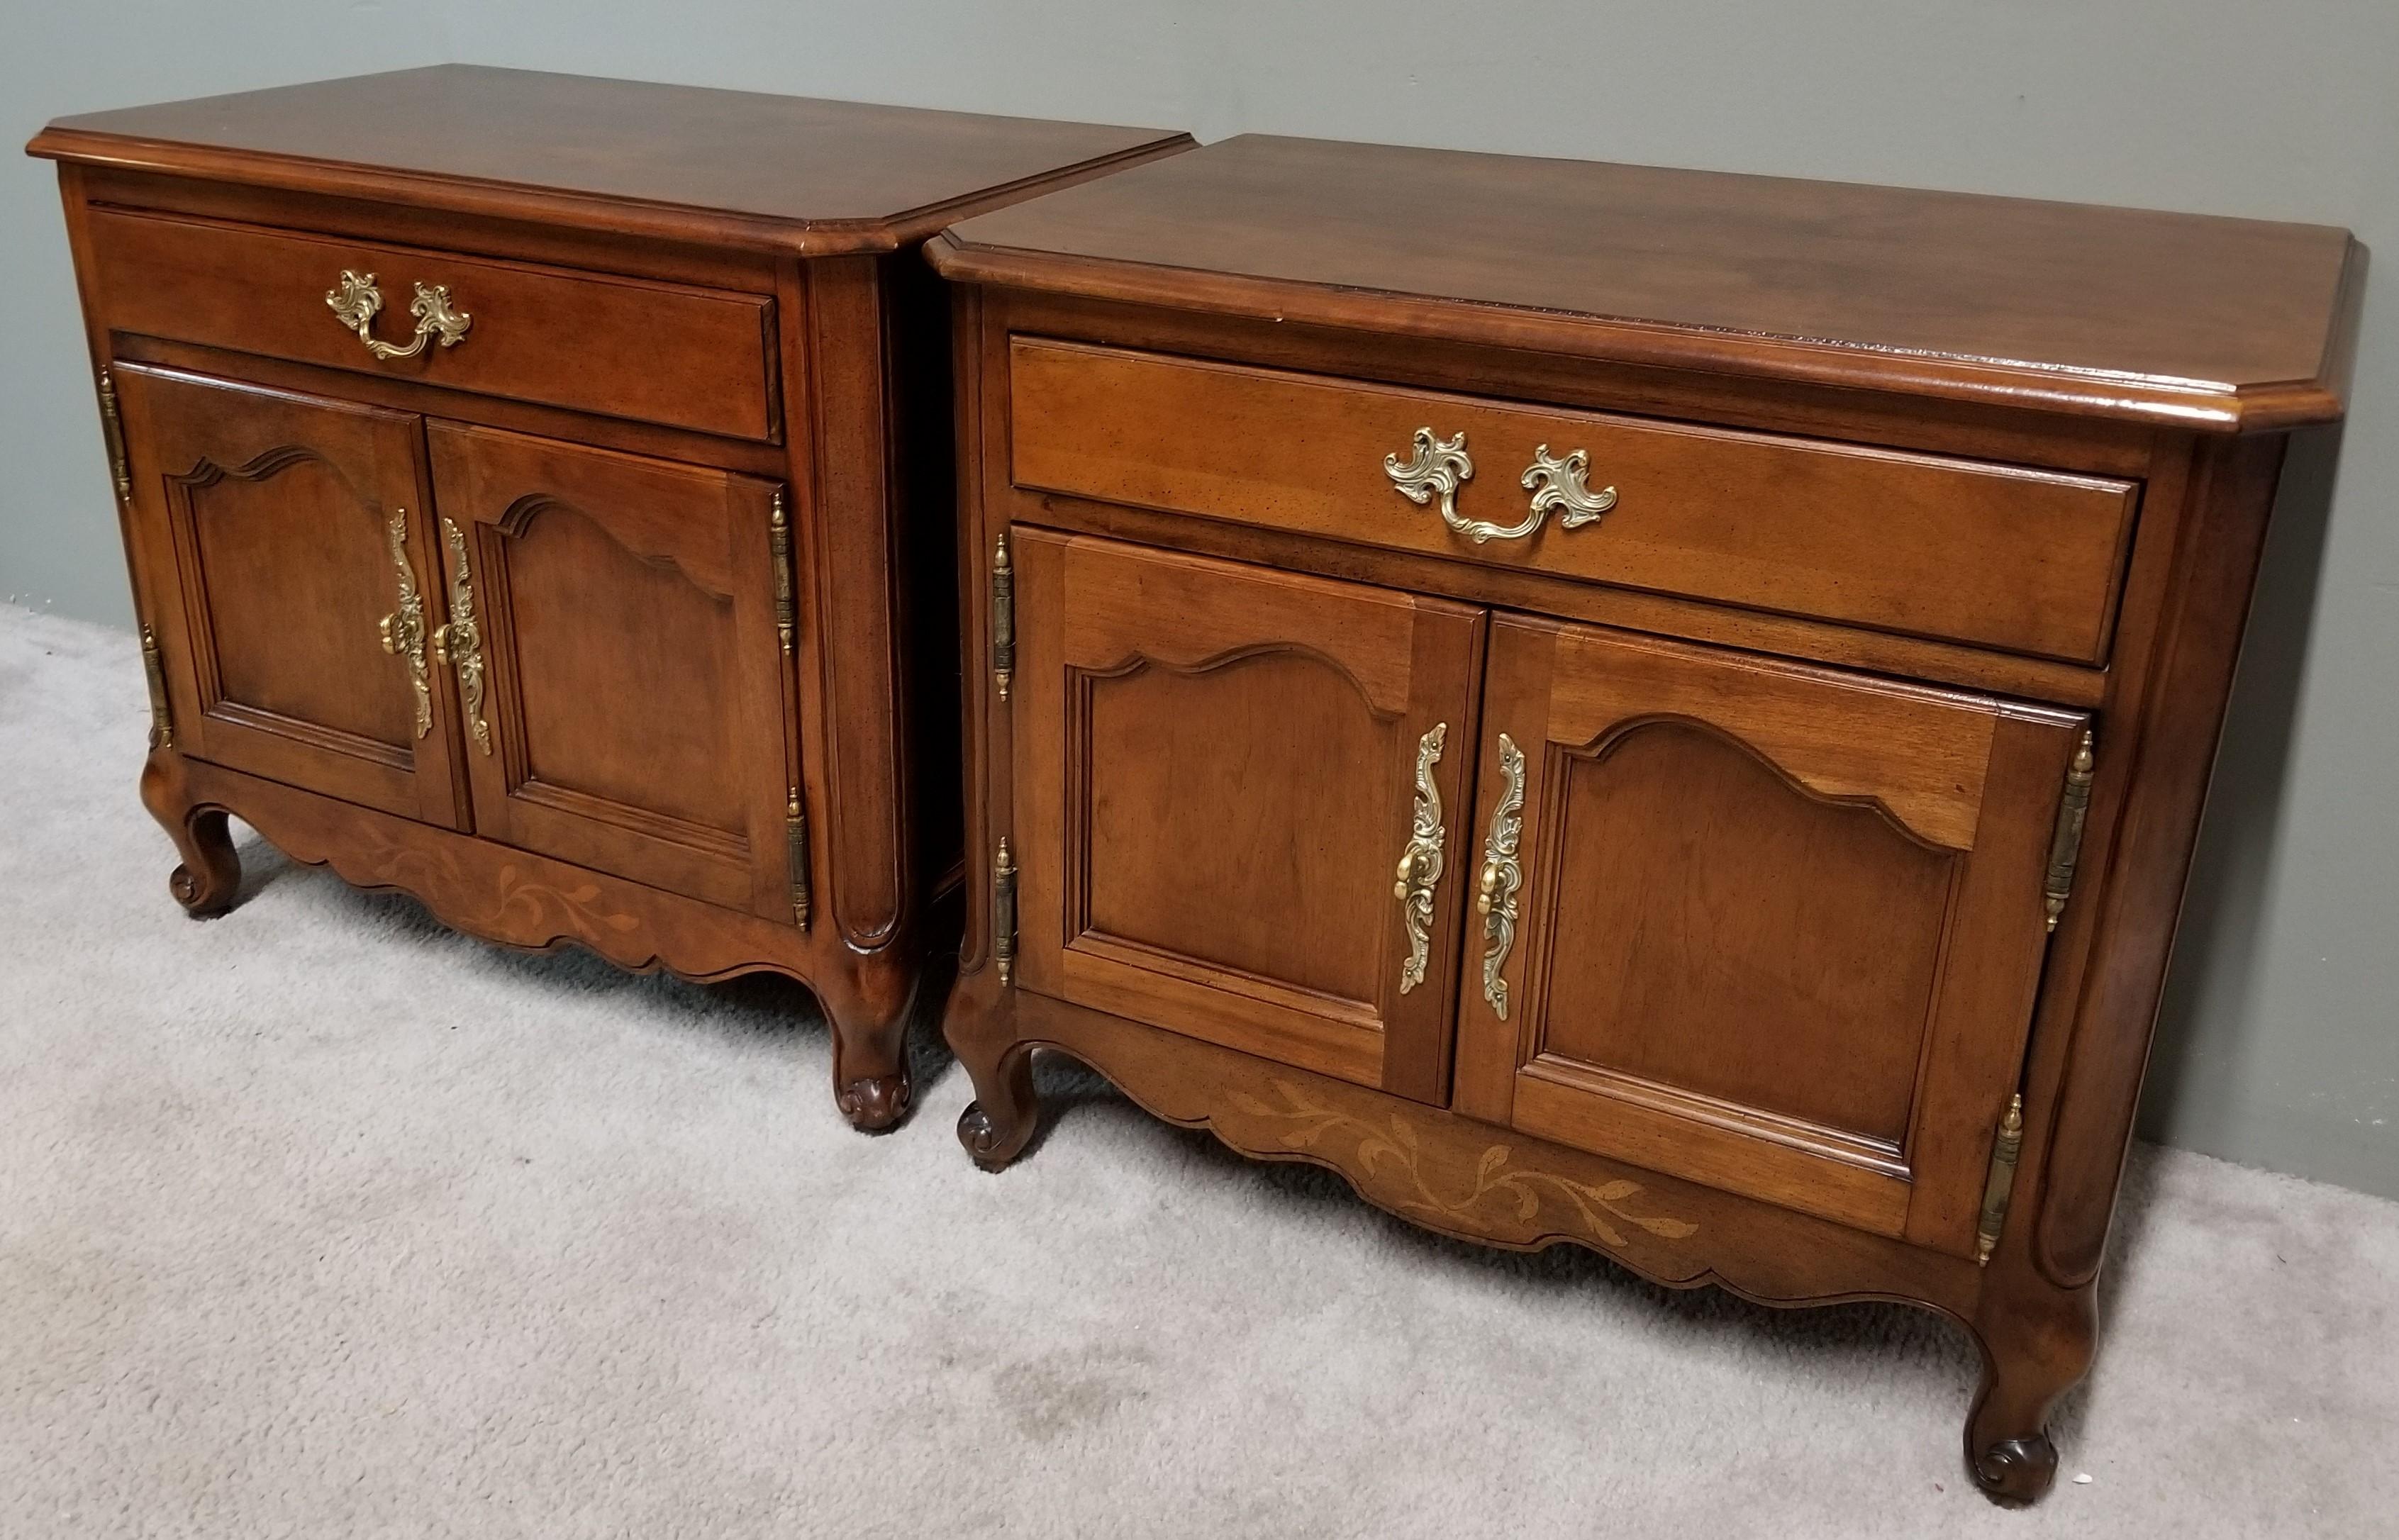 For FULL item description click on CONTINUE READING at the bottom of this page.

Pair of Wellington Hall French Provincial Solid Mahogany Nightstands

Approximate measurements in inches
24